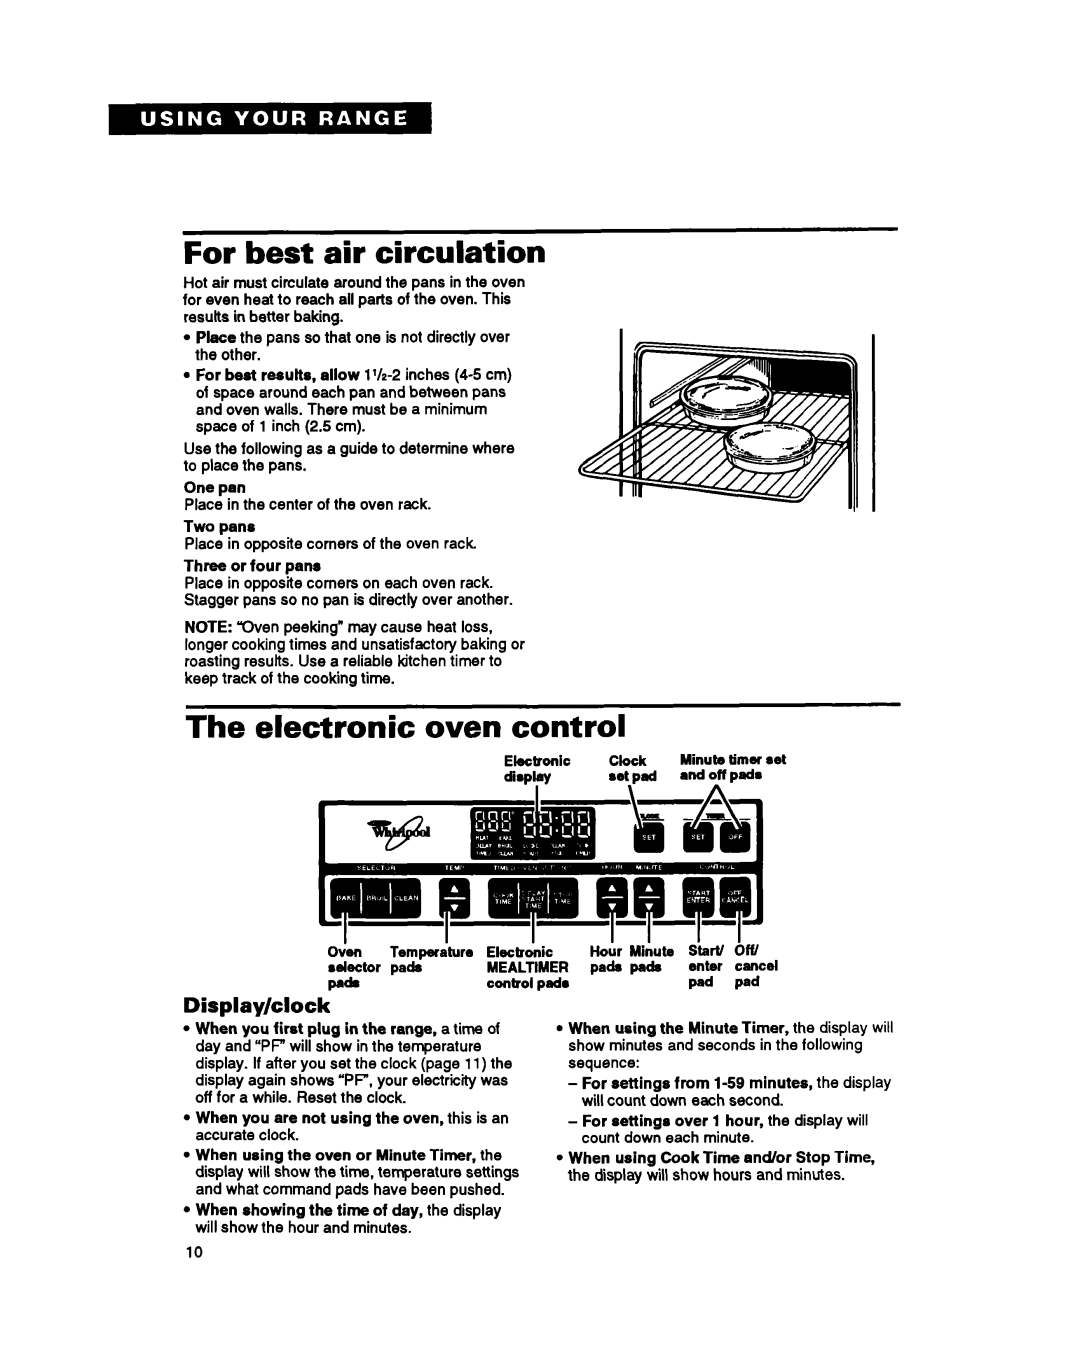 Whirlpool SF387PEY, SF397PEY, SF387PCY manual For best air circulation, The electronic oven control, Display/clock 